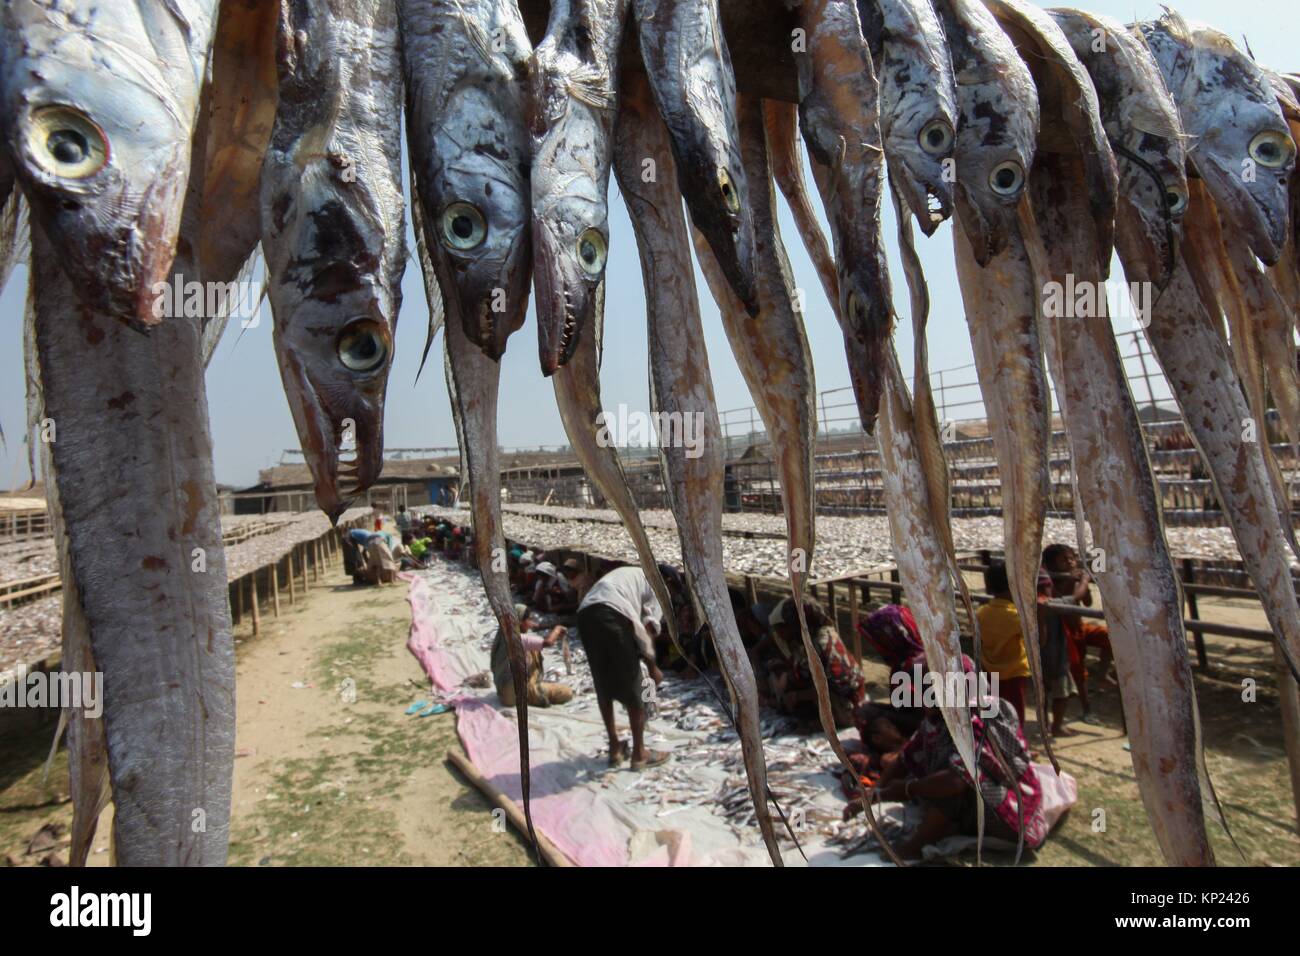 Cox's Bazar, Bangladesh. Dried-fish production has got a huge thrust as the winter is approaching in the region as well as the whole country. Stock Photo